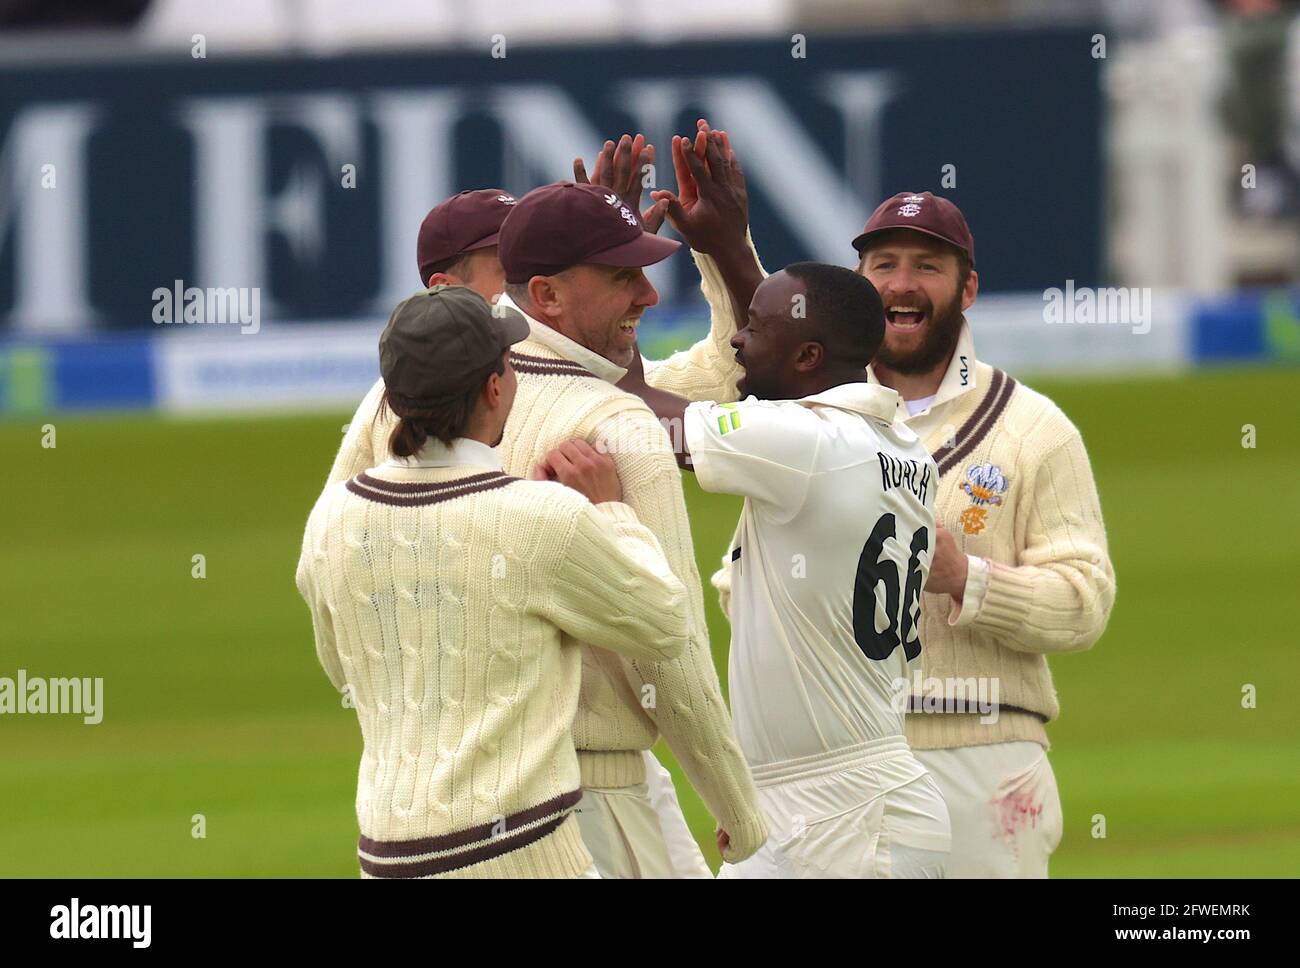 22 May, 2021. London, UK. Surrey’s Kemar Roach gets the wicket of Middlesex’s Jack Davies as Surrey take on Middlesex in  the County Championship at the Kia Oval, day three David Rowe/Alamy Live News Stock Photo